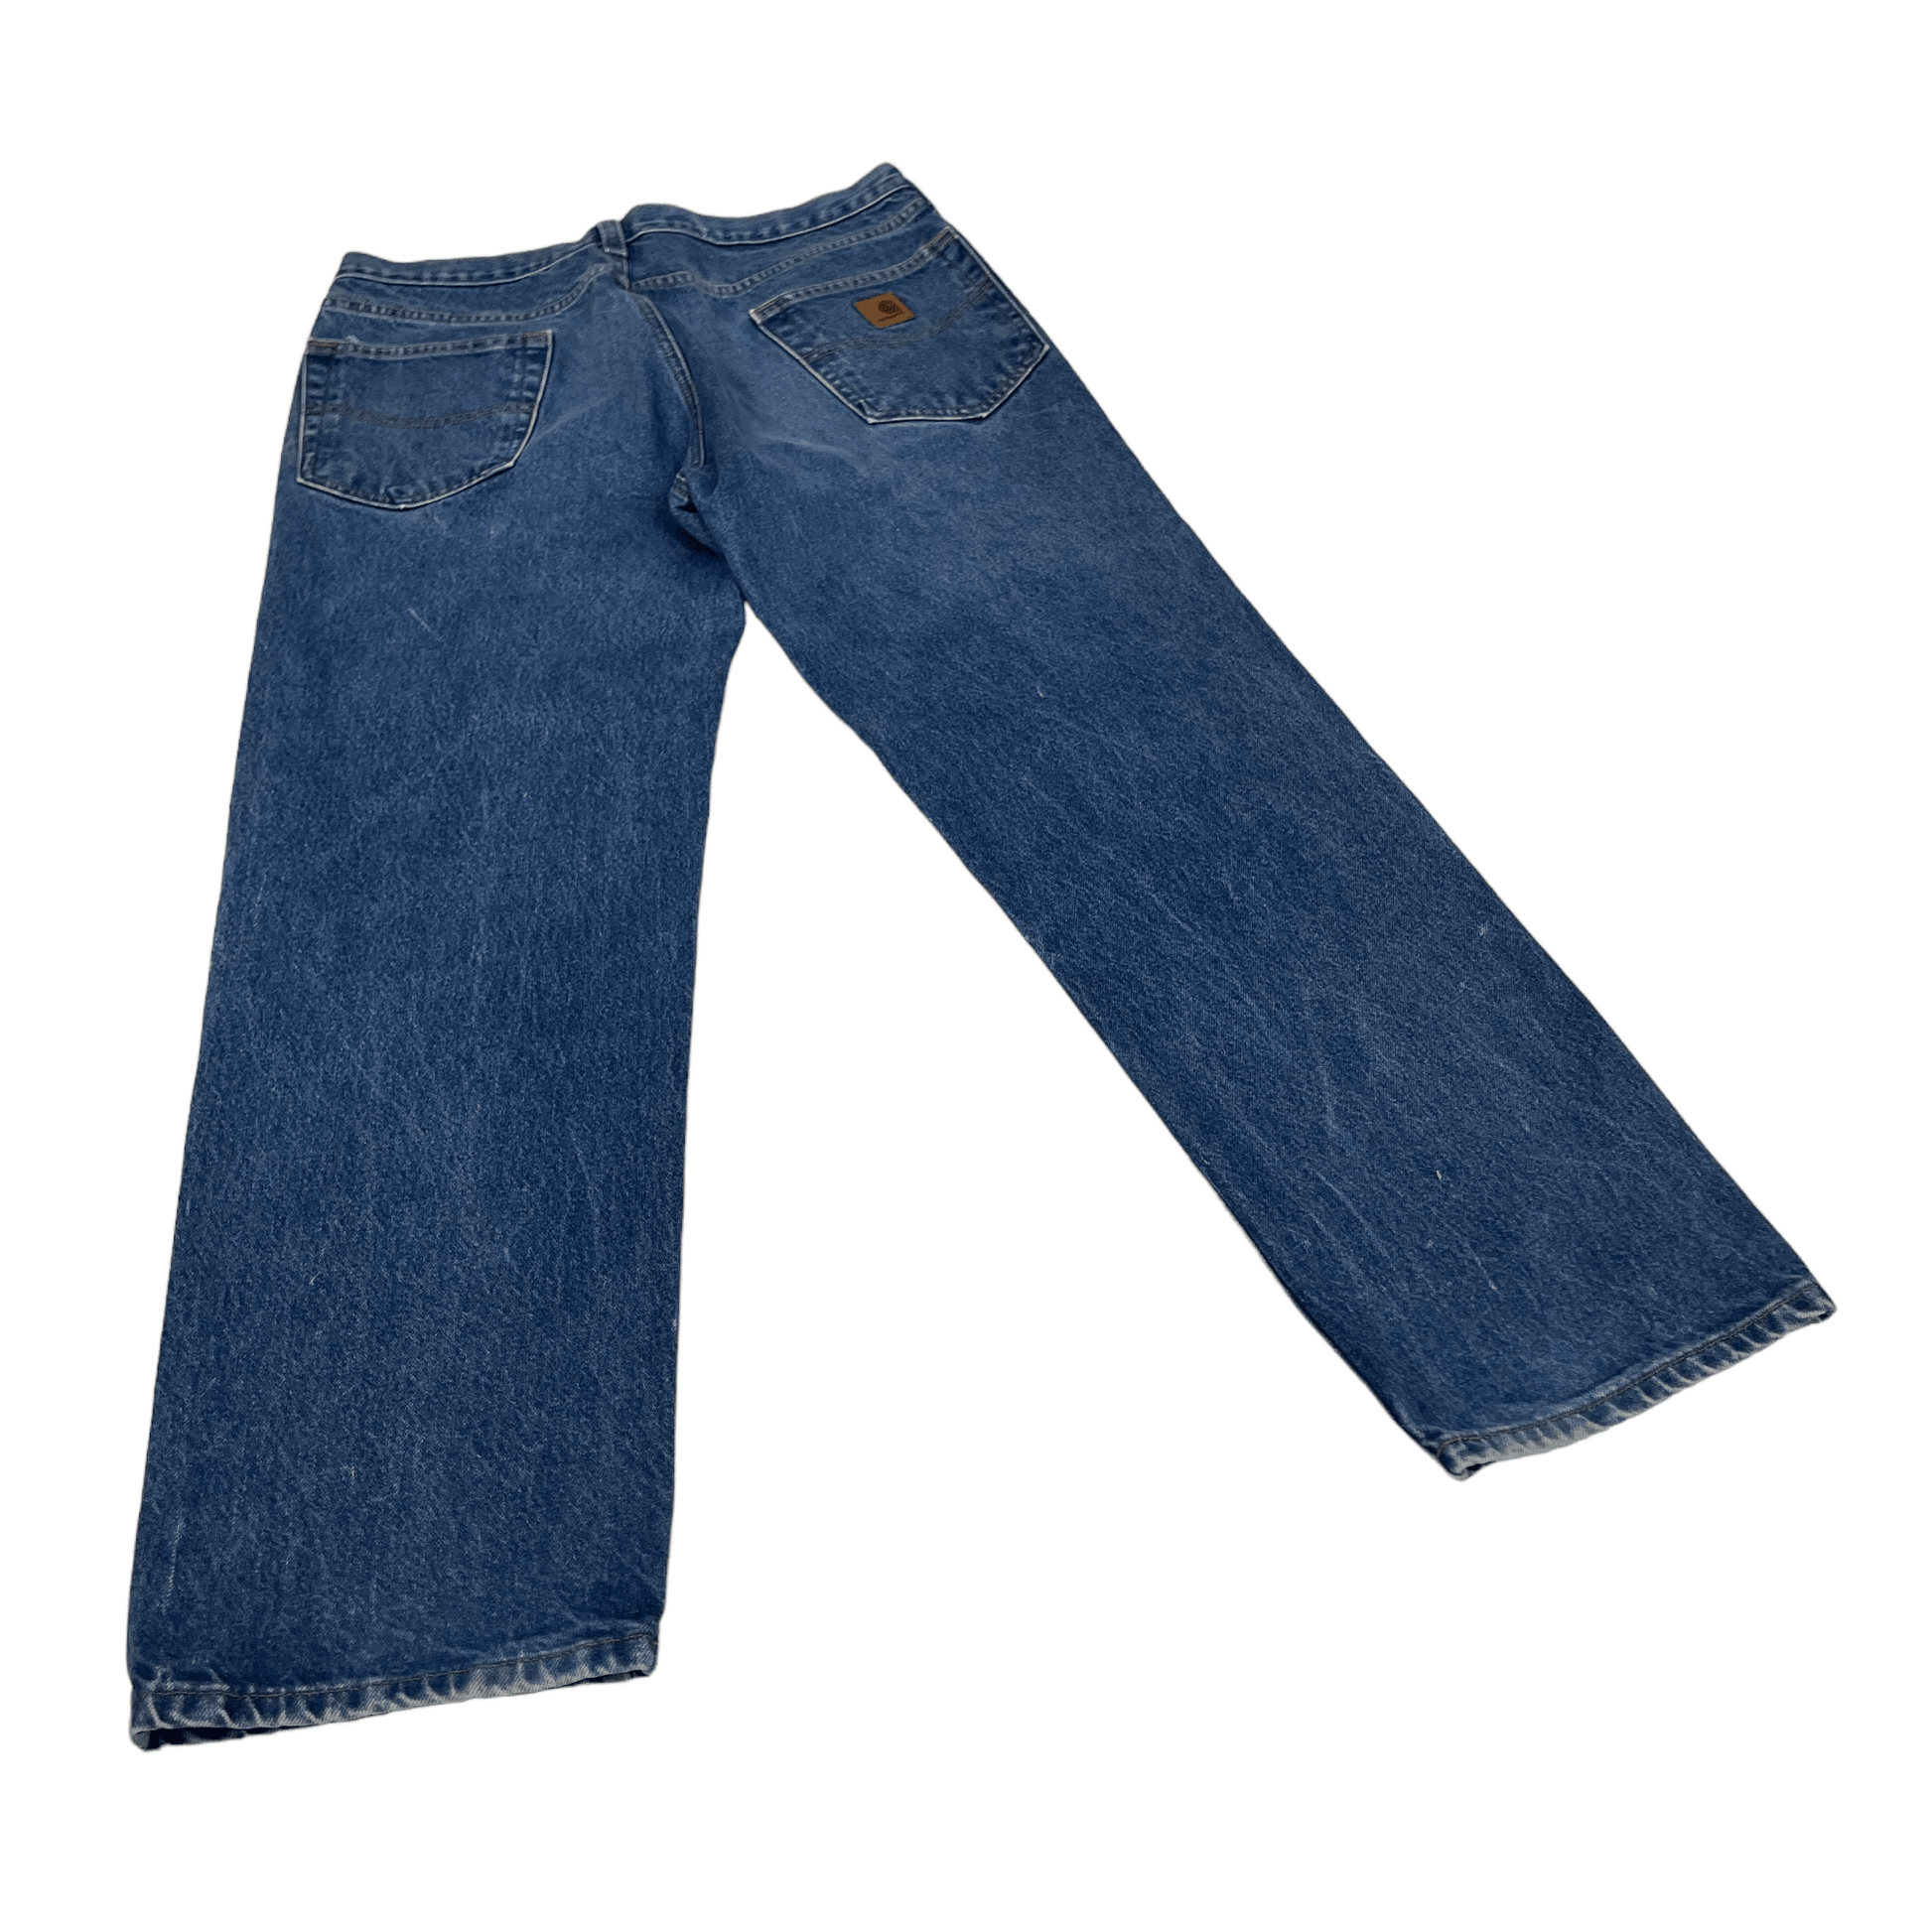 Vintage Carharrt Relaxed Fit Jeans - 34” x 30” - The Streetwear Studio